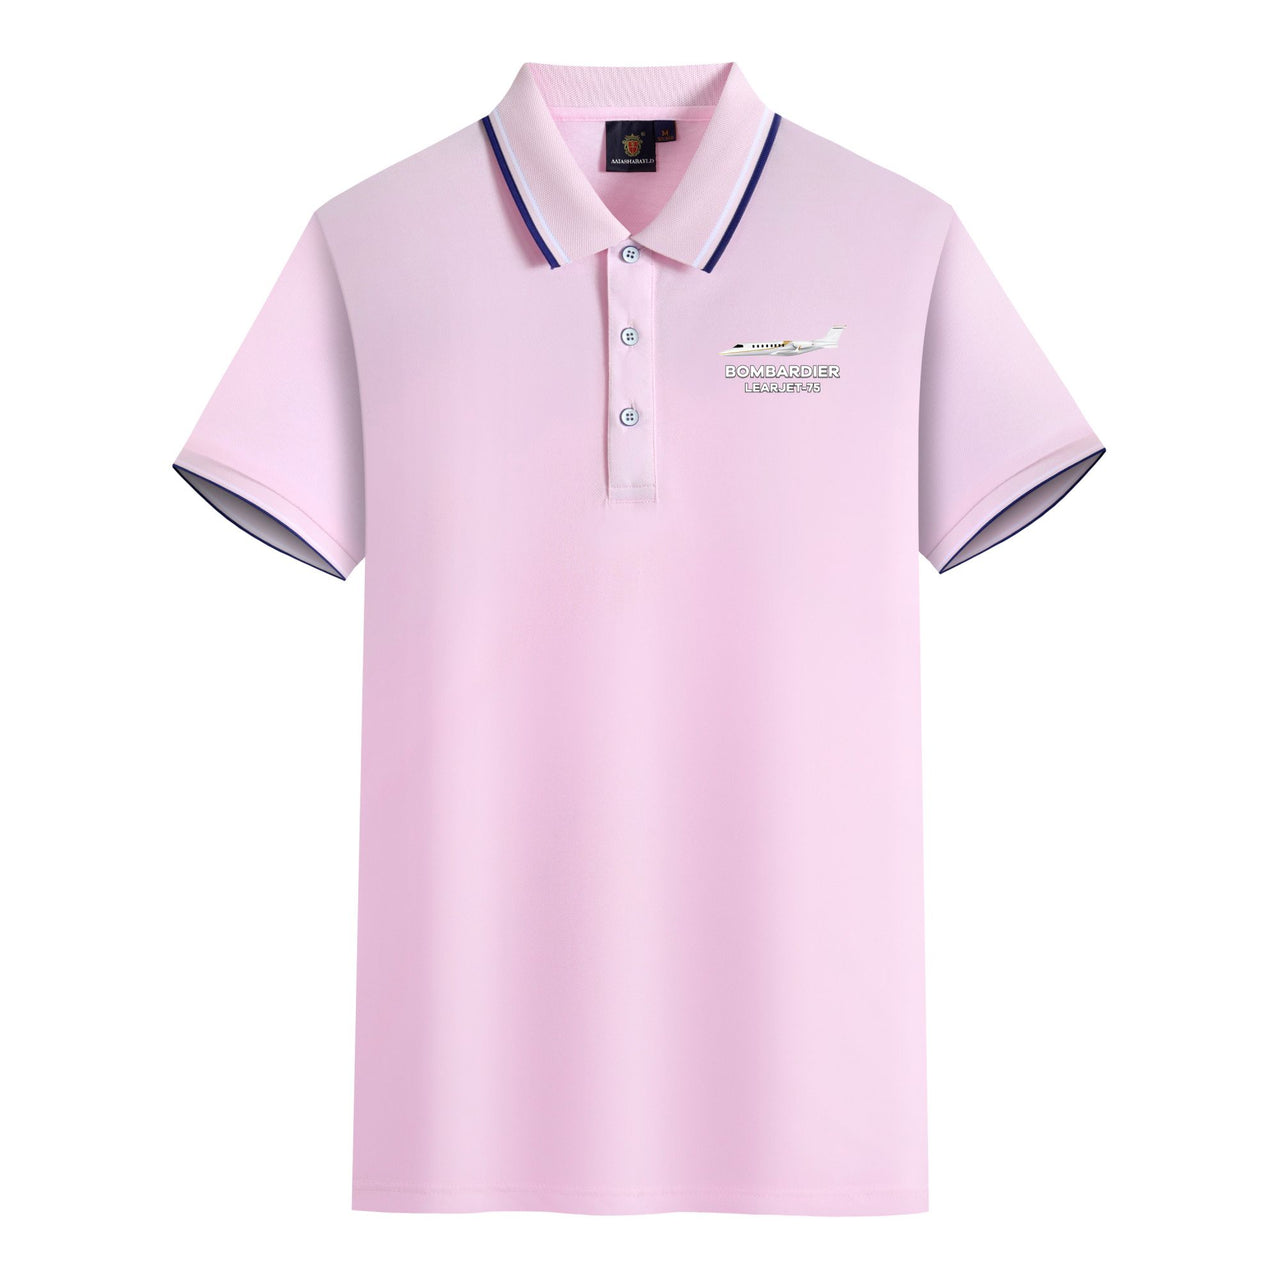 The Bombardier Learjet 75 Designed Stylish Polo T-Shirts